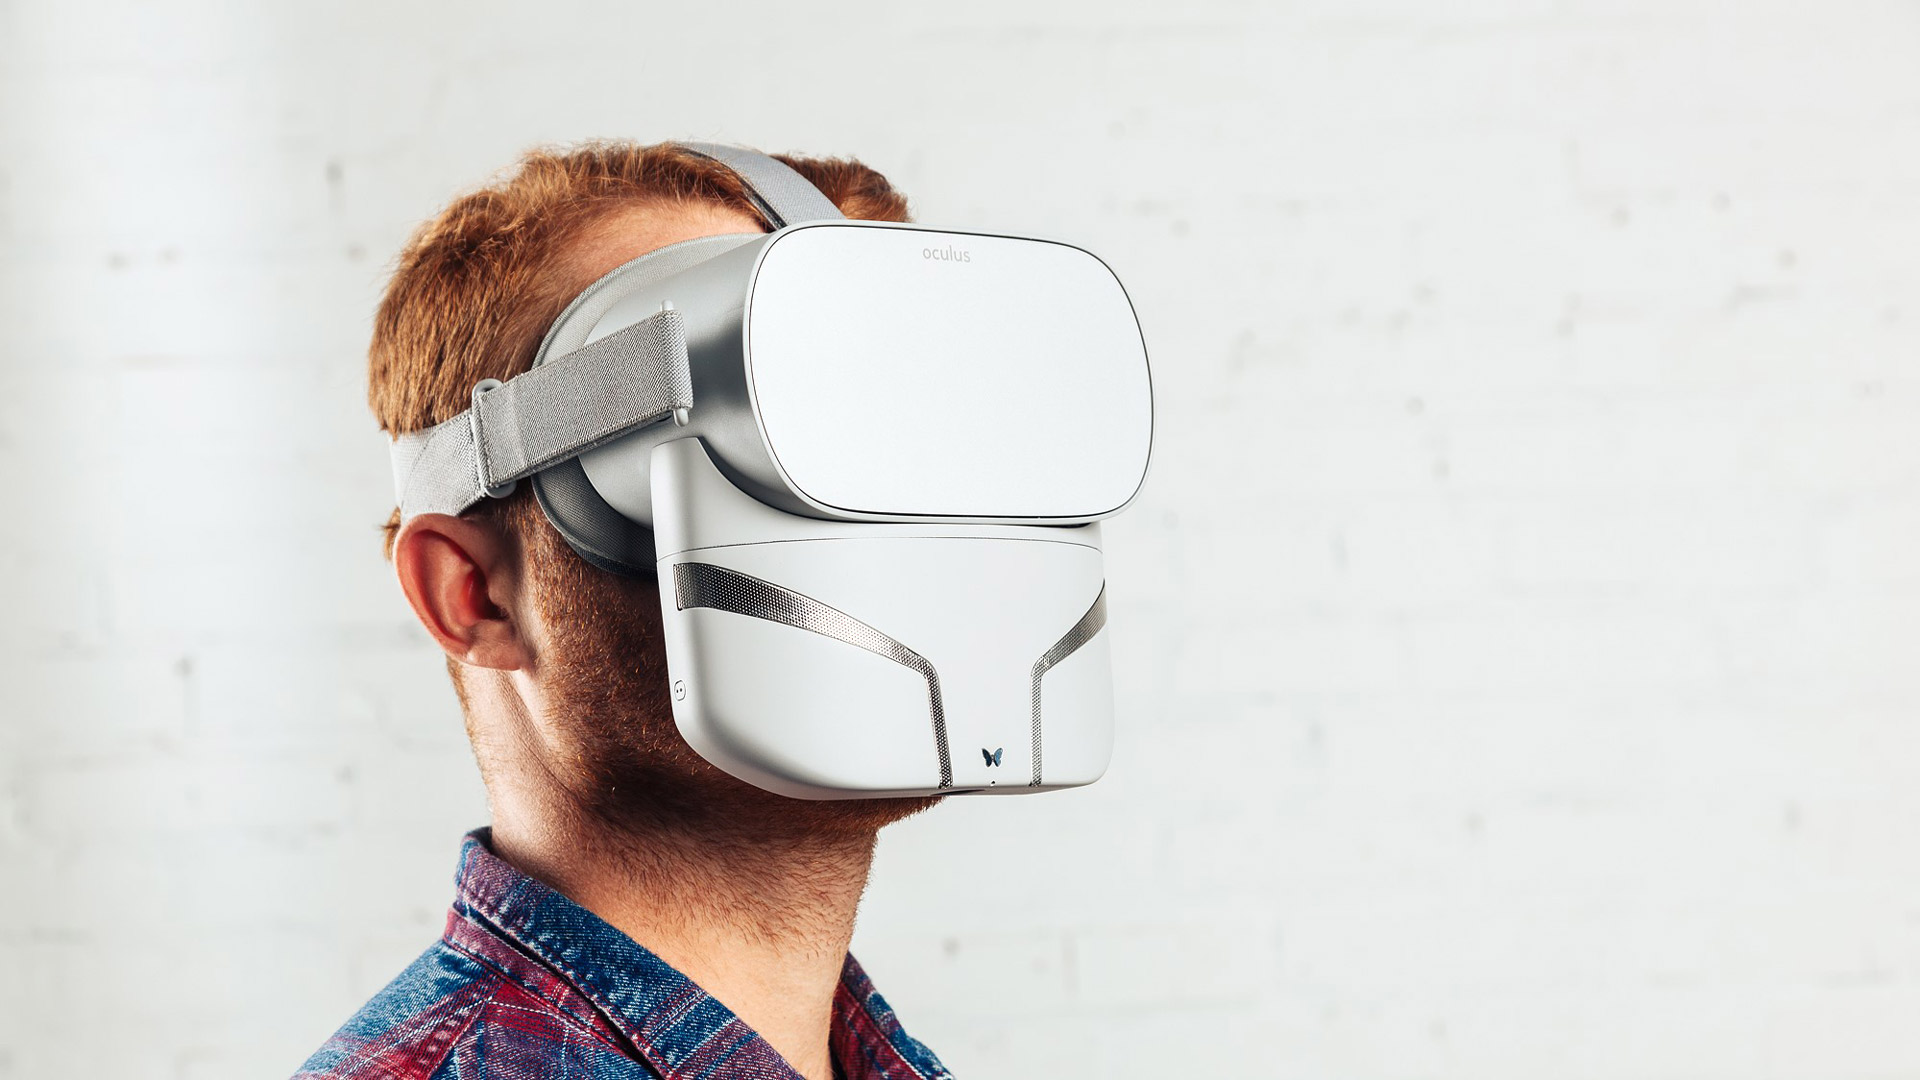 Hardware Review : Feelreal – The World’s First Multisensory VR Mask